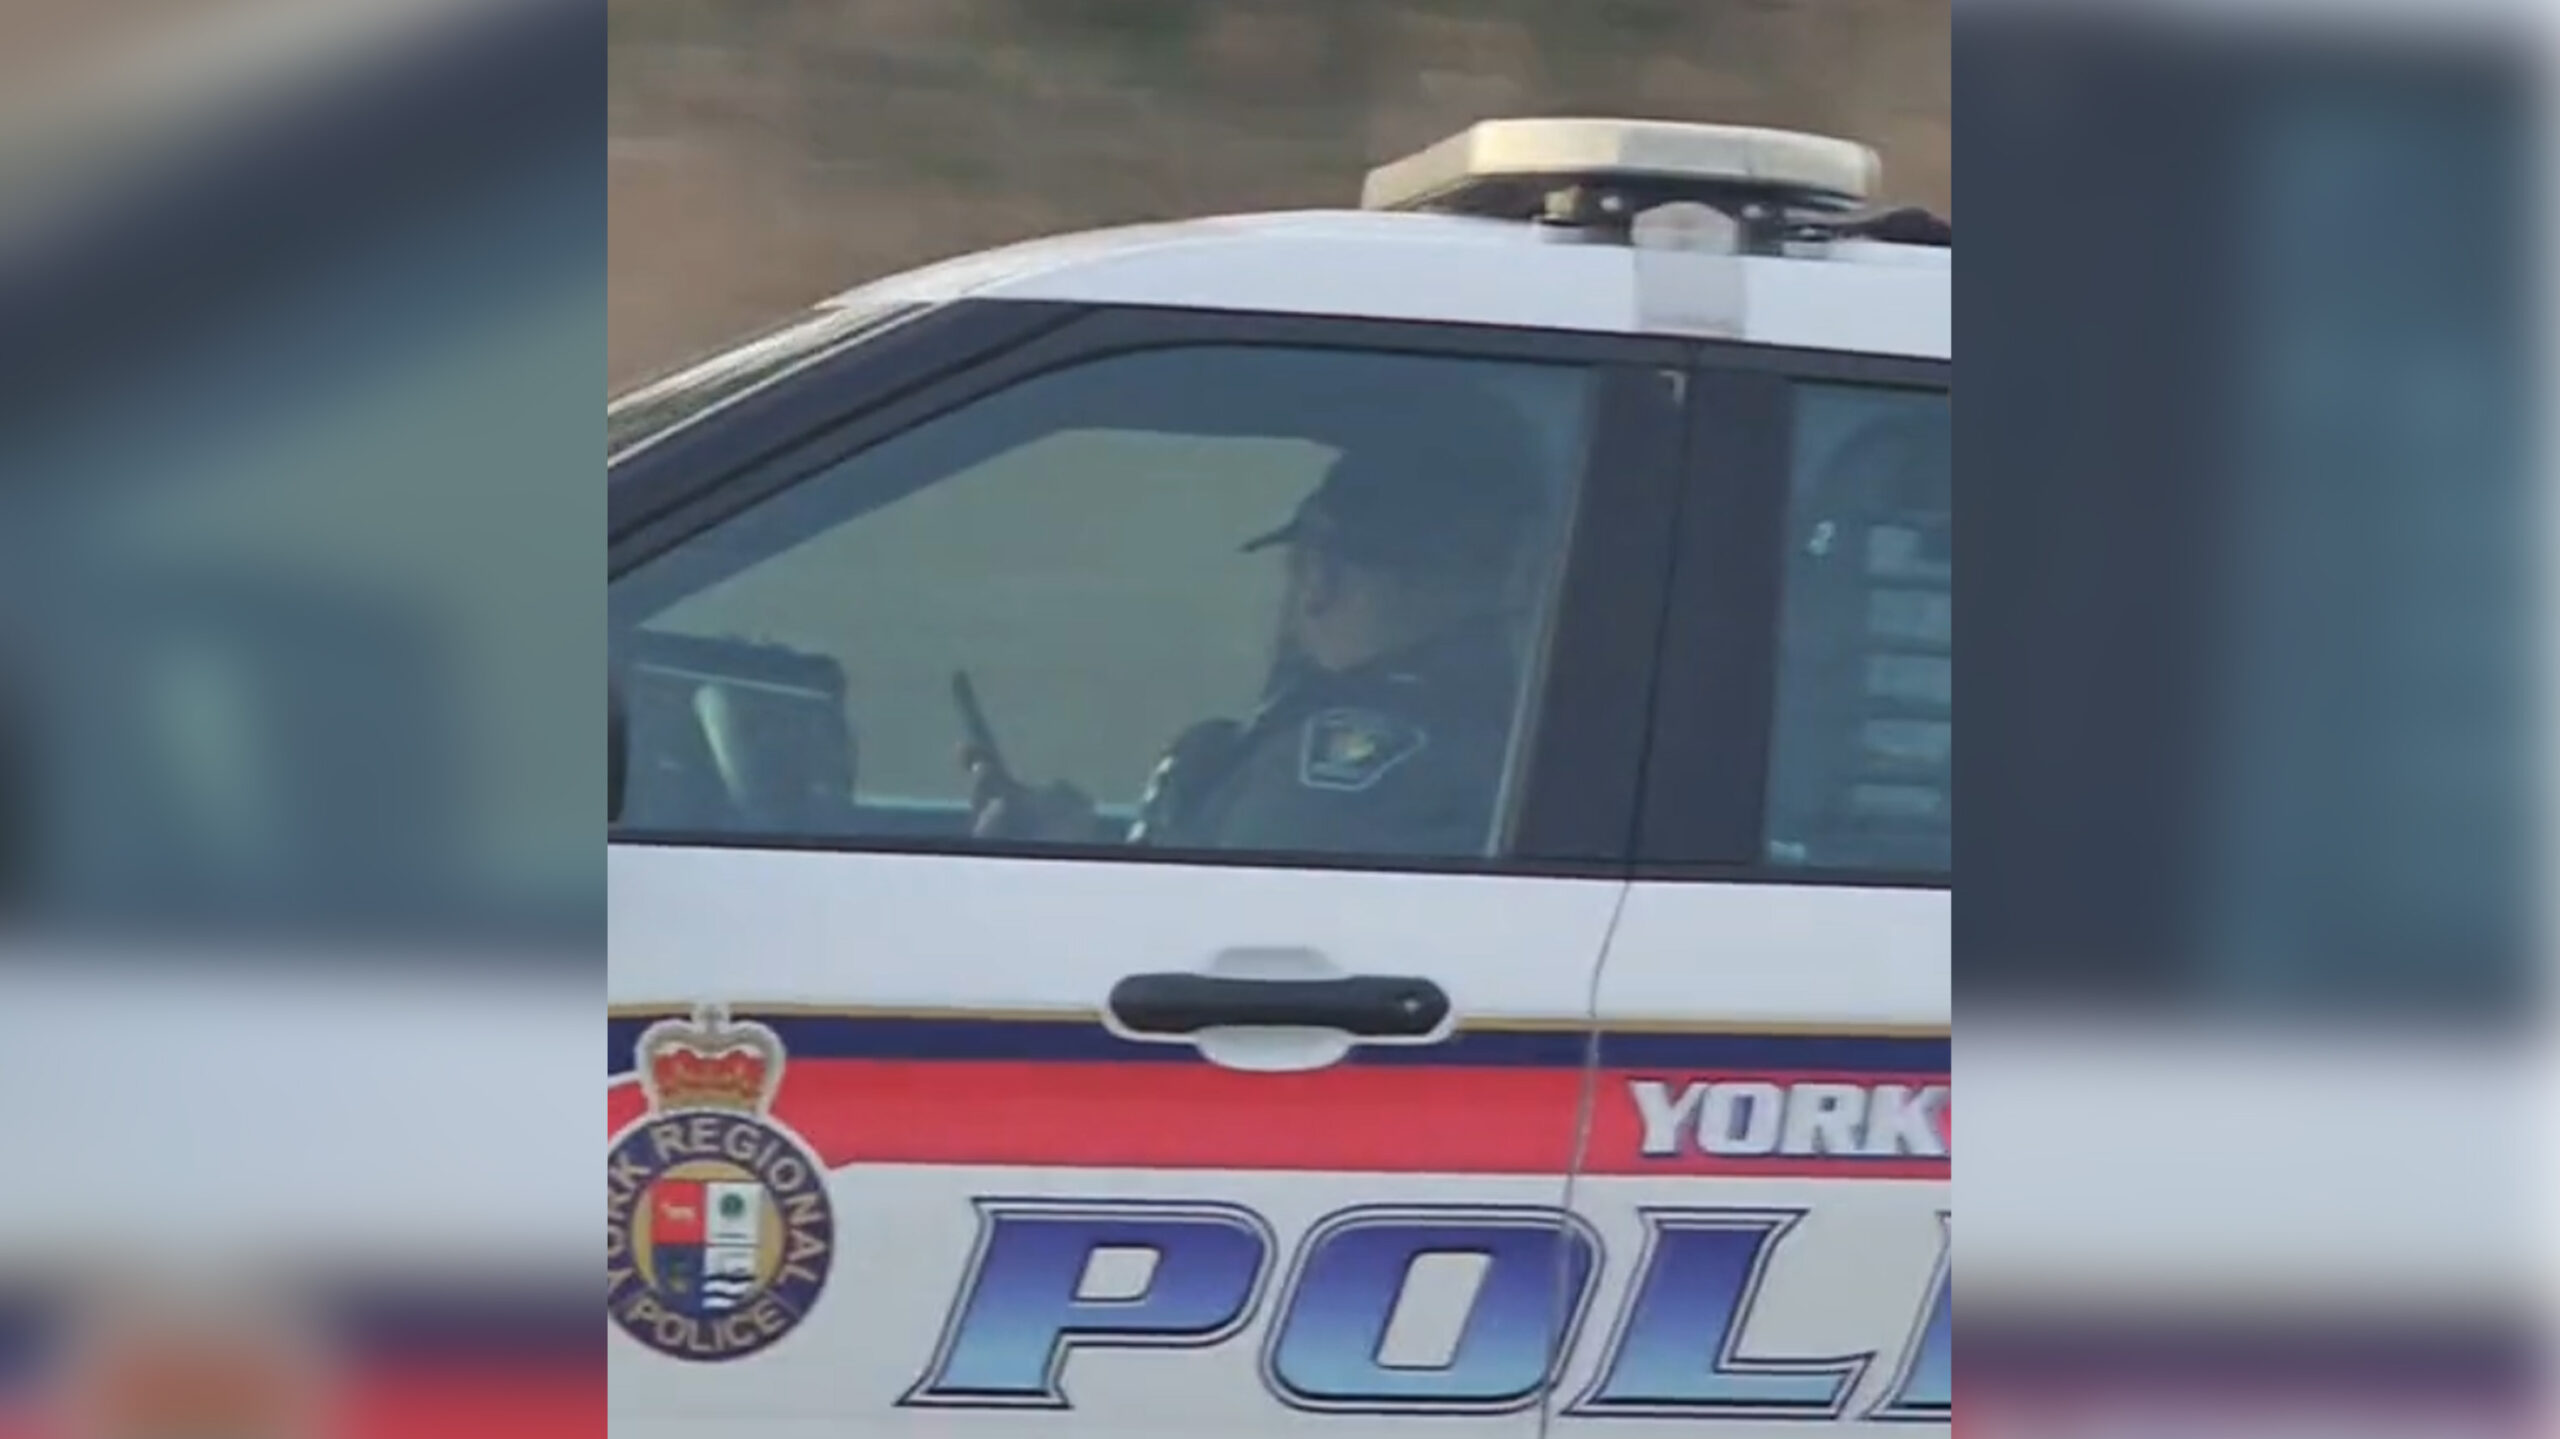 Screenshot from a video showing a York Regional Police officer using their phone while driving.